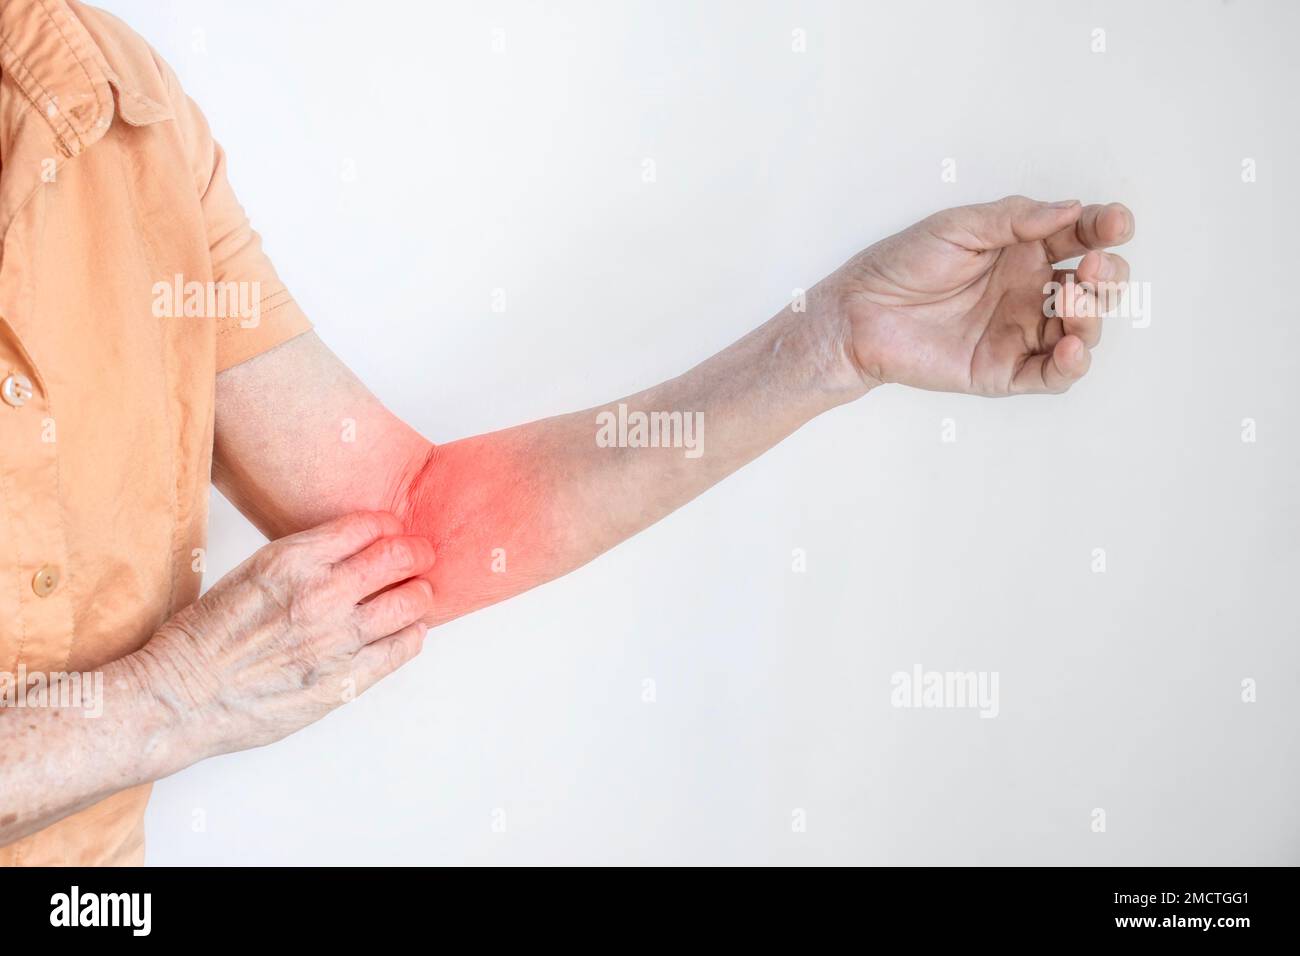 Asian elder woman scratching her arm. Concept of itchy skin diseases such as scabies, fungal infection, eczema, psoriasis, rash, allergy, etc. Stock Photo